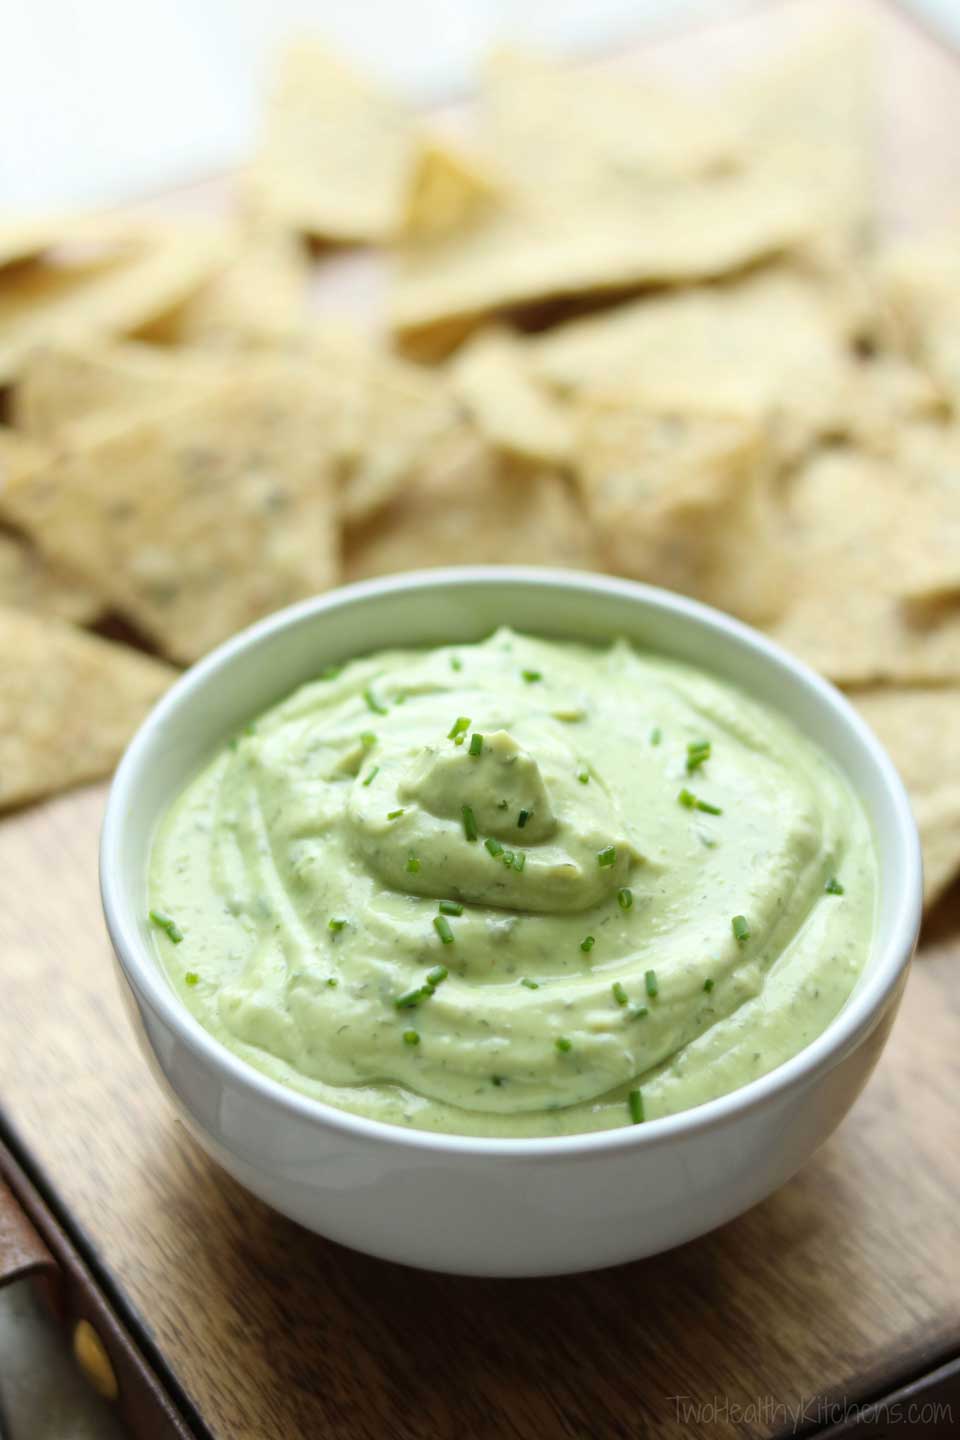 Just 5 minutes to full-on, creamy, avocado joy! Our Avocado Ranch Dip with Greek Yogurt shot straight into our list of top healthy recipes! 